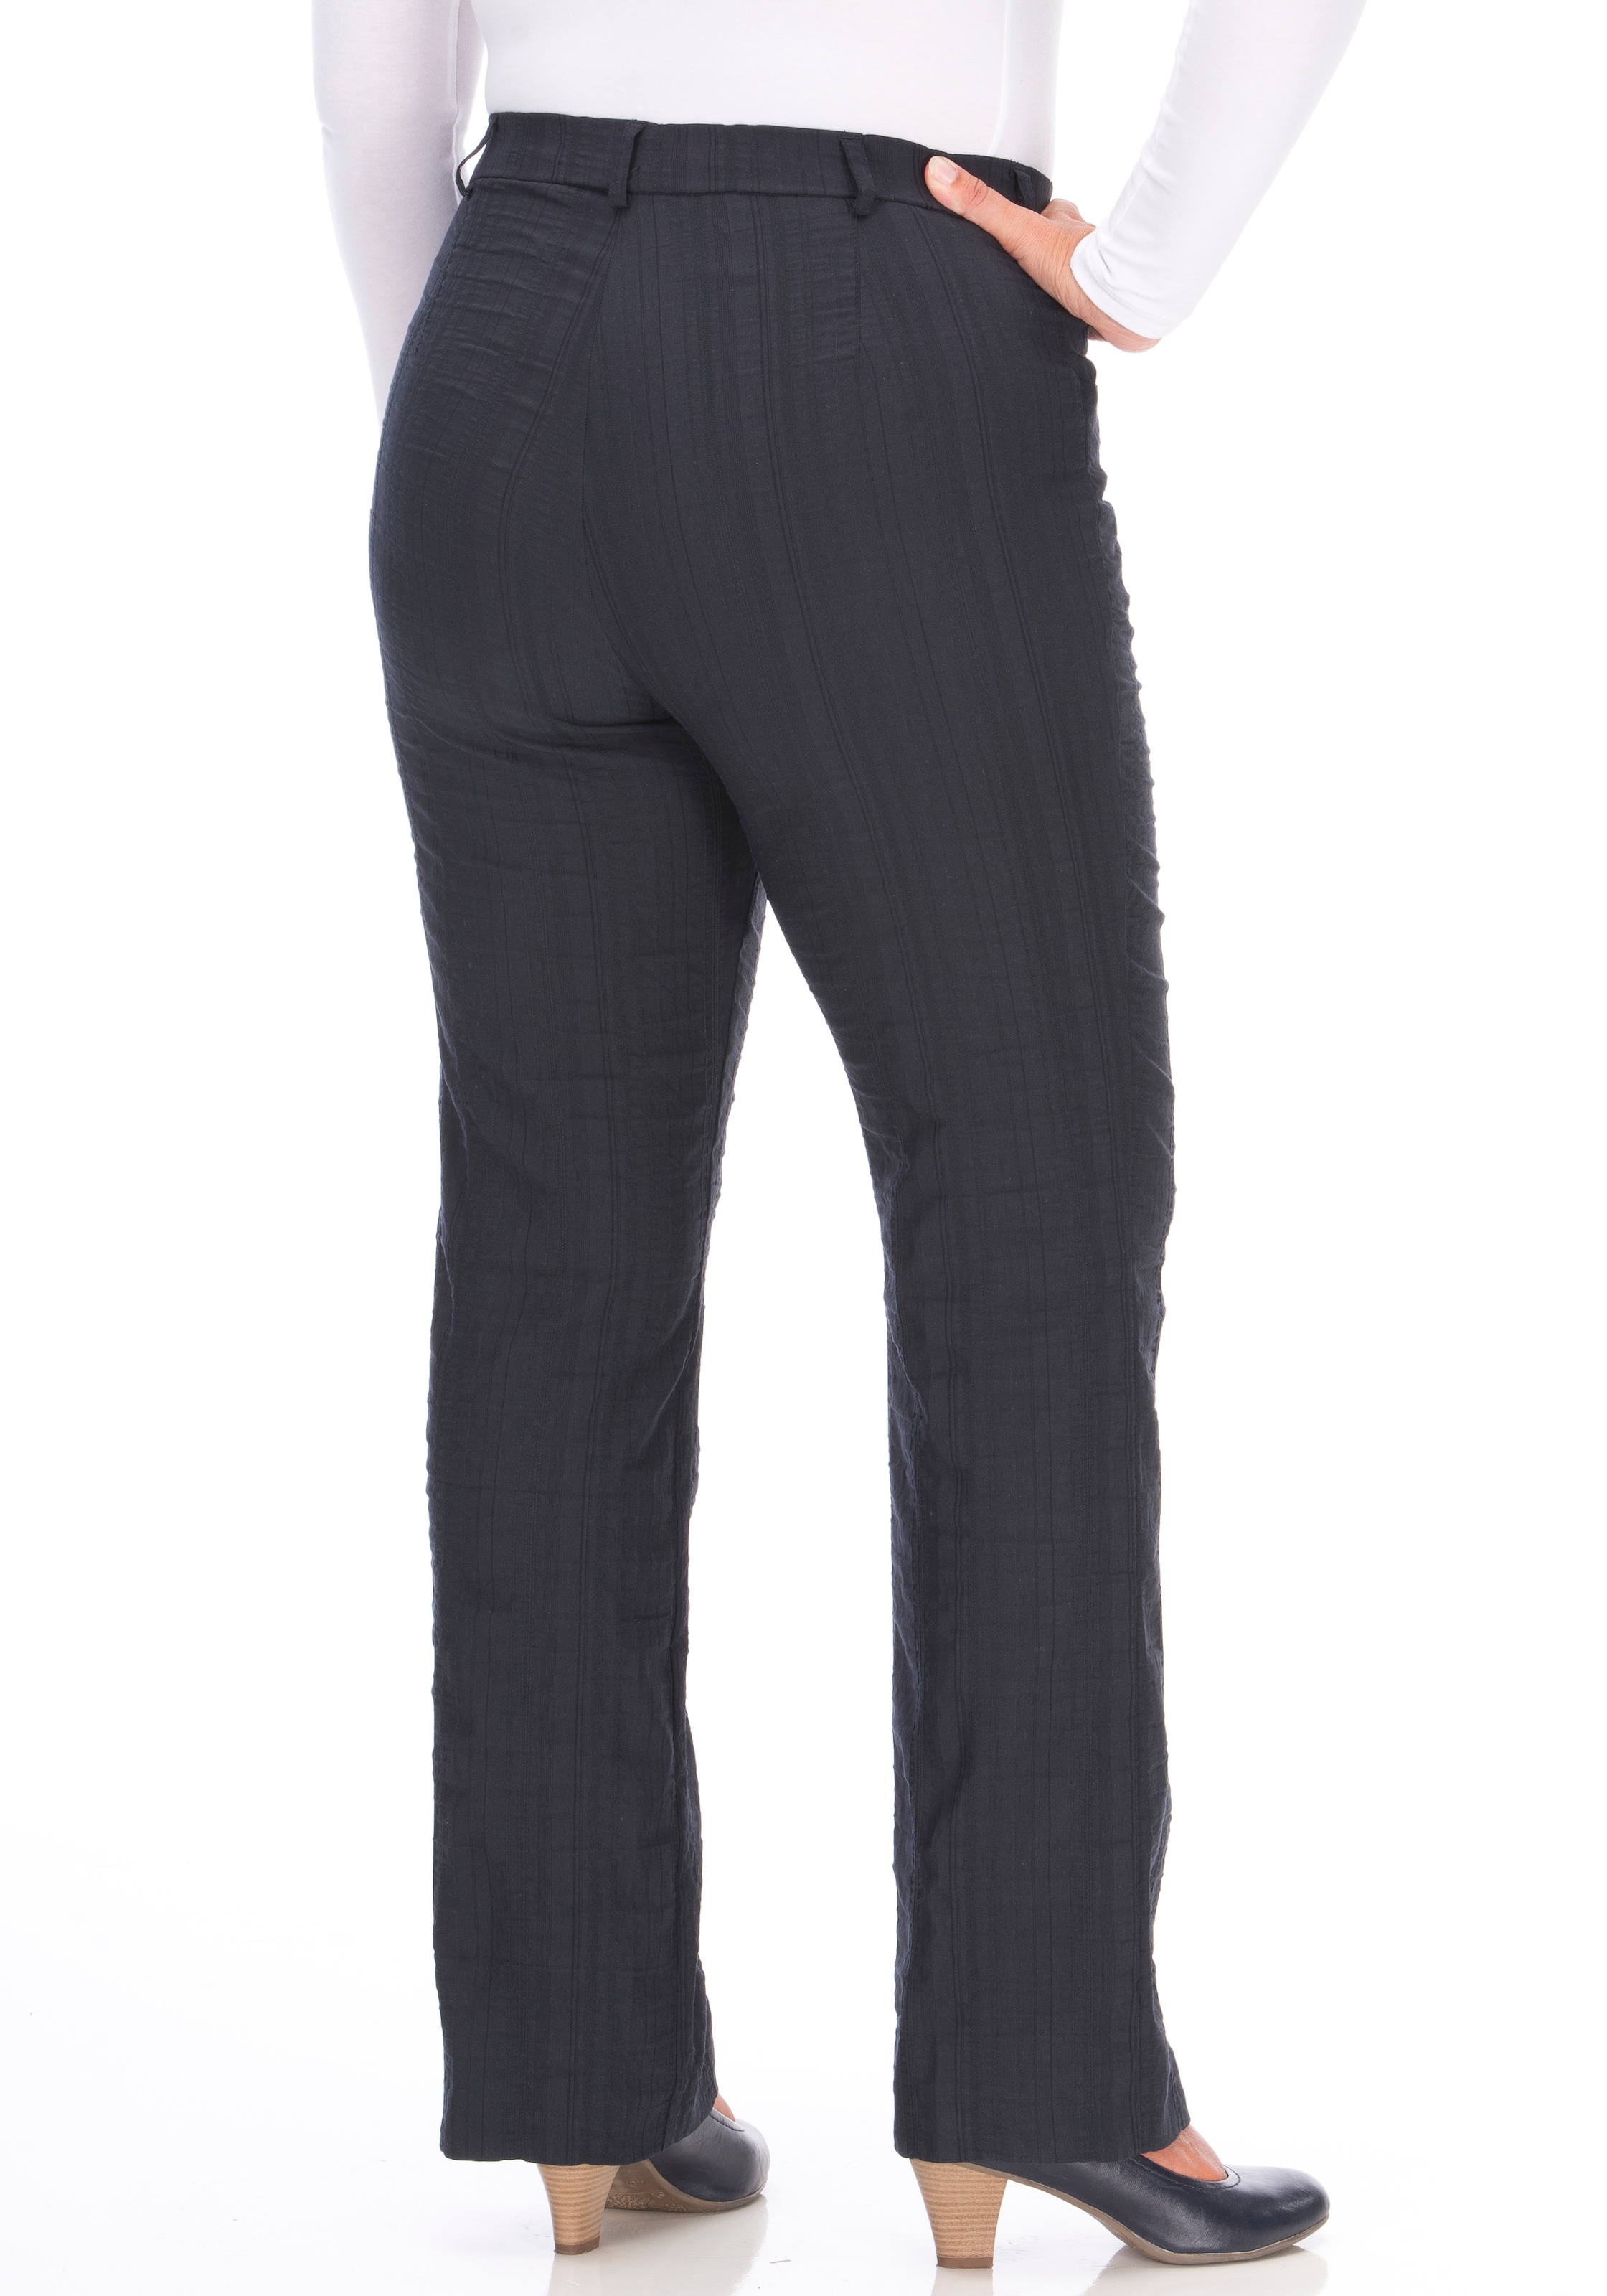 KjBRAND Stoffhose »Bea«, optimale Passform ♕ bei in Quer-Stretch